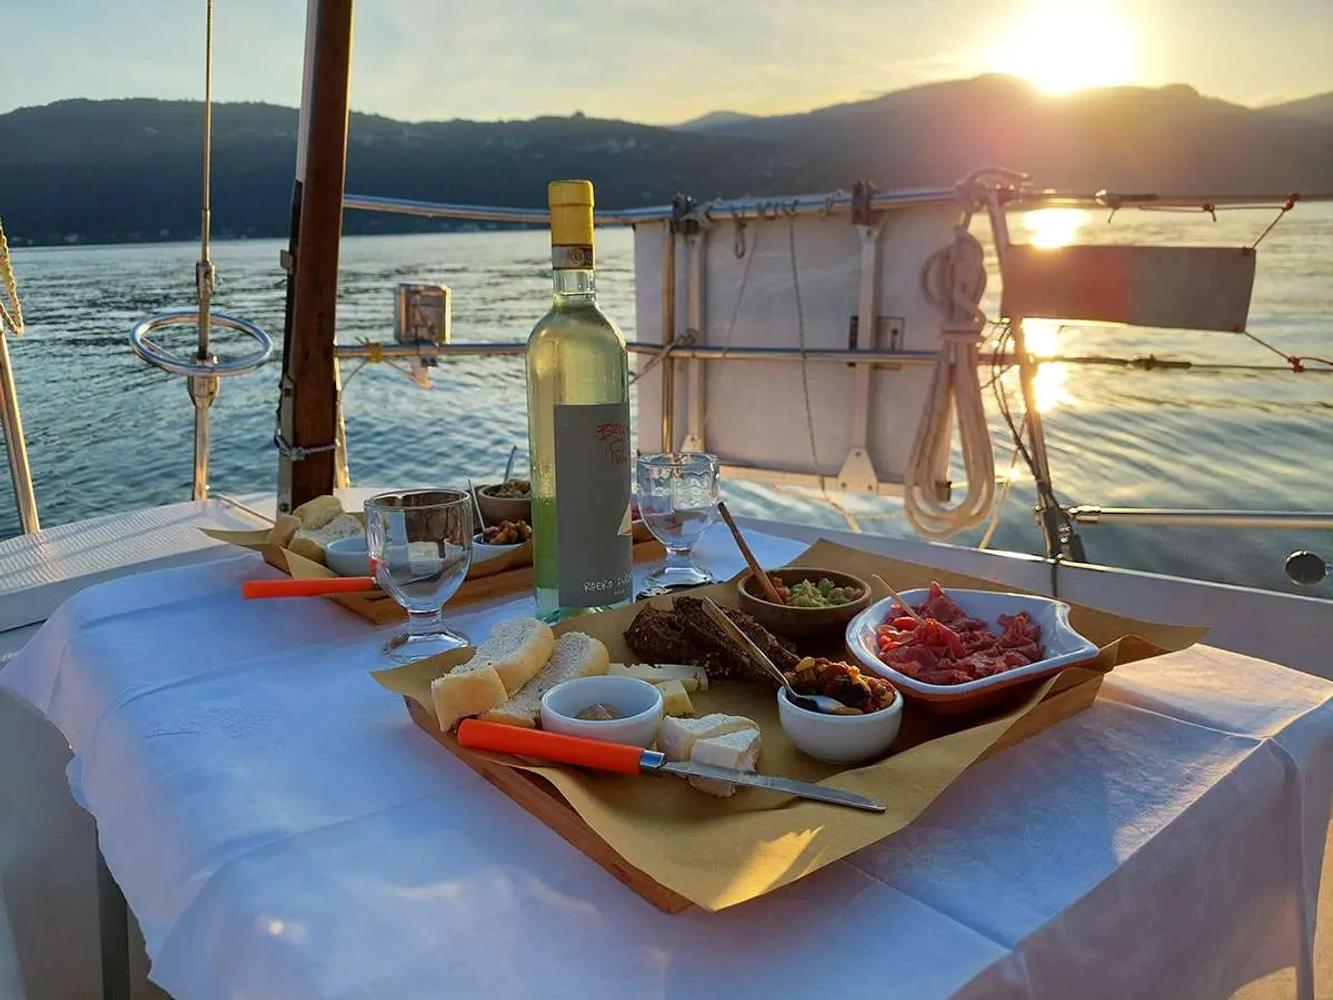 Apertivo on Lake Maggiore with Local Products